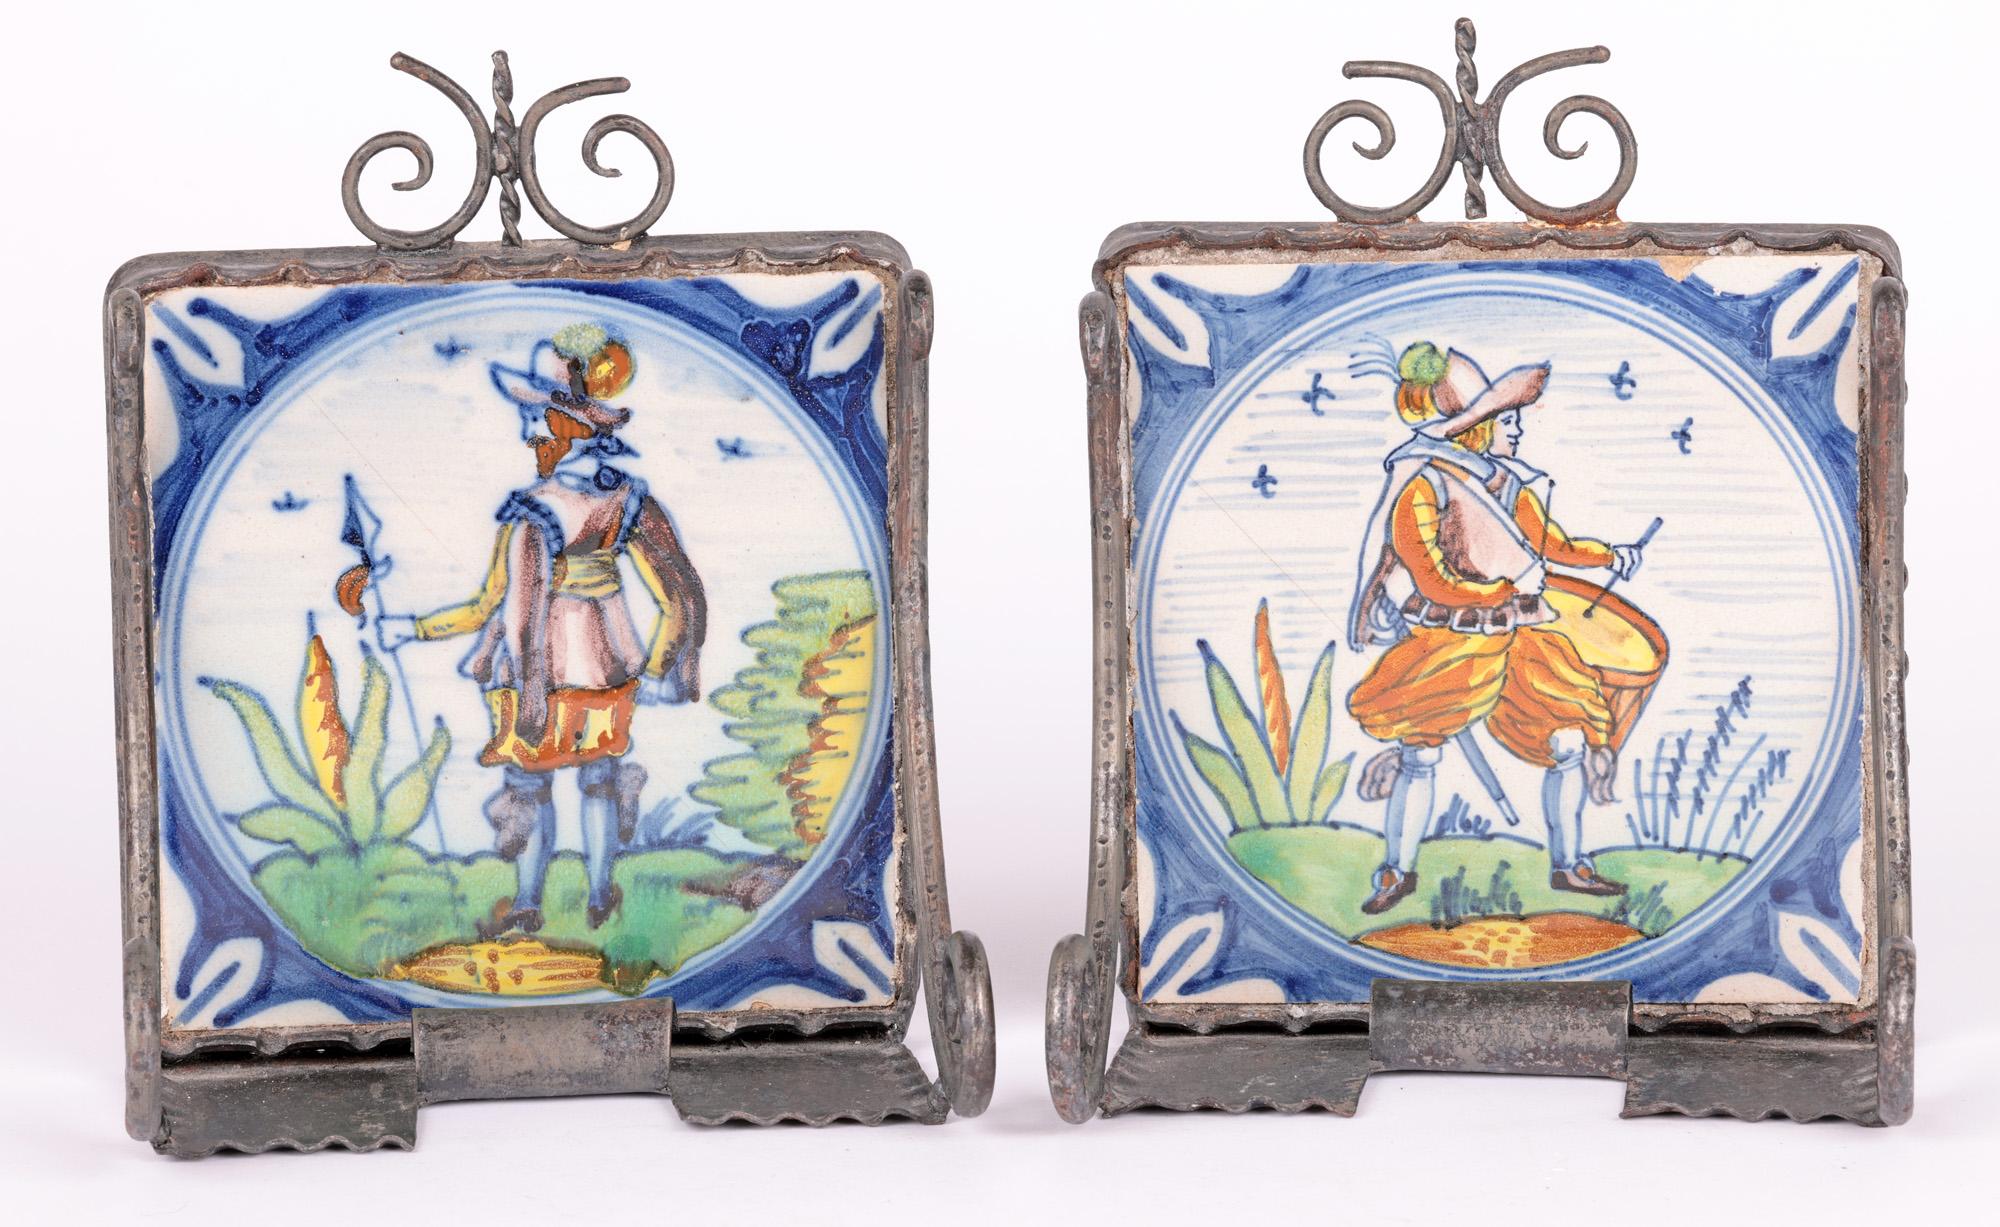 Polychrome 18th Century Tile Mounted Metal Bookends 8